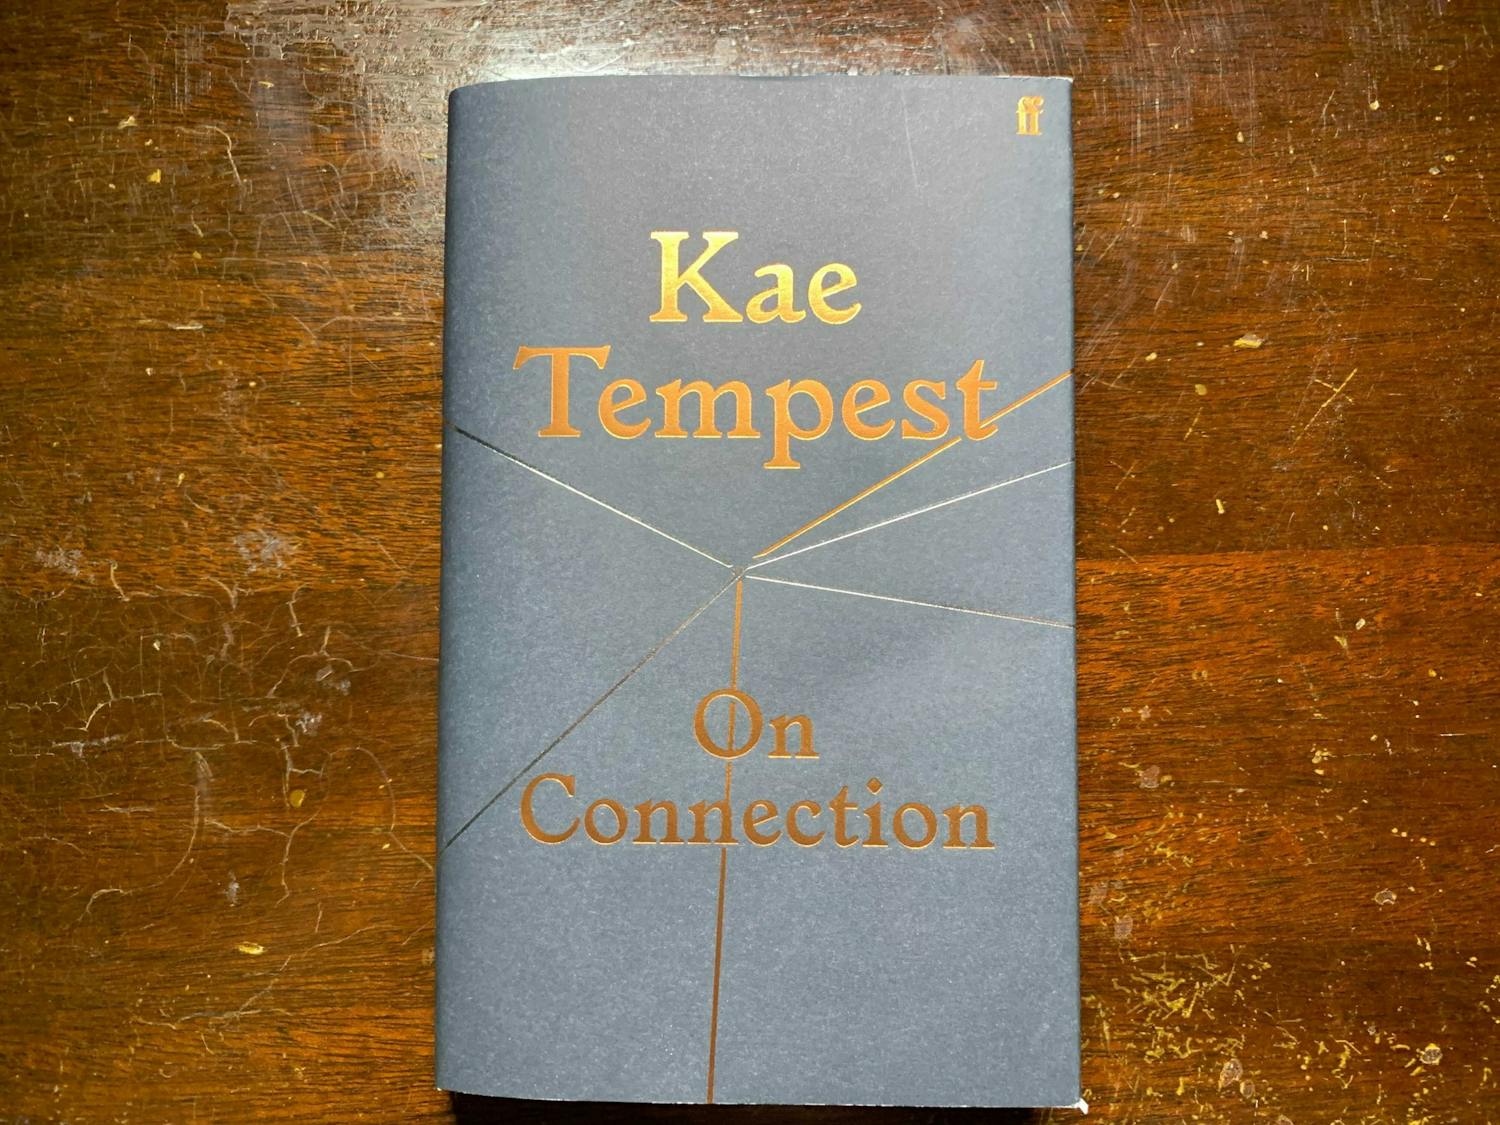 “On Connection” by Sunday Times-bestselling author Kae Tempest.